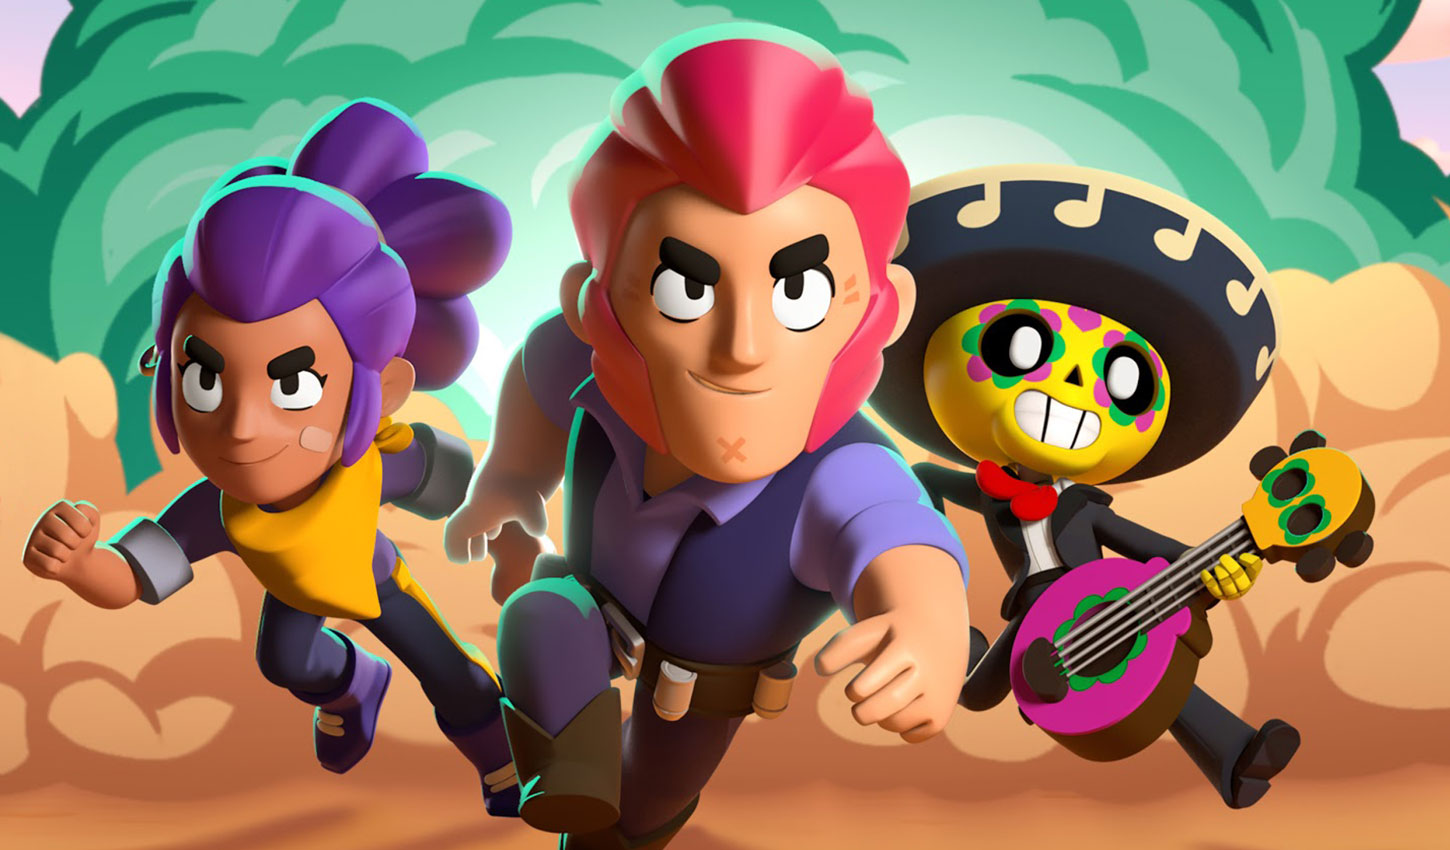 “Brawl Stars Hits $17.5 Million in First Week in China main image feature”